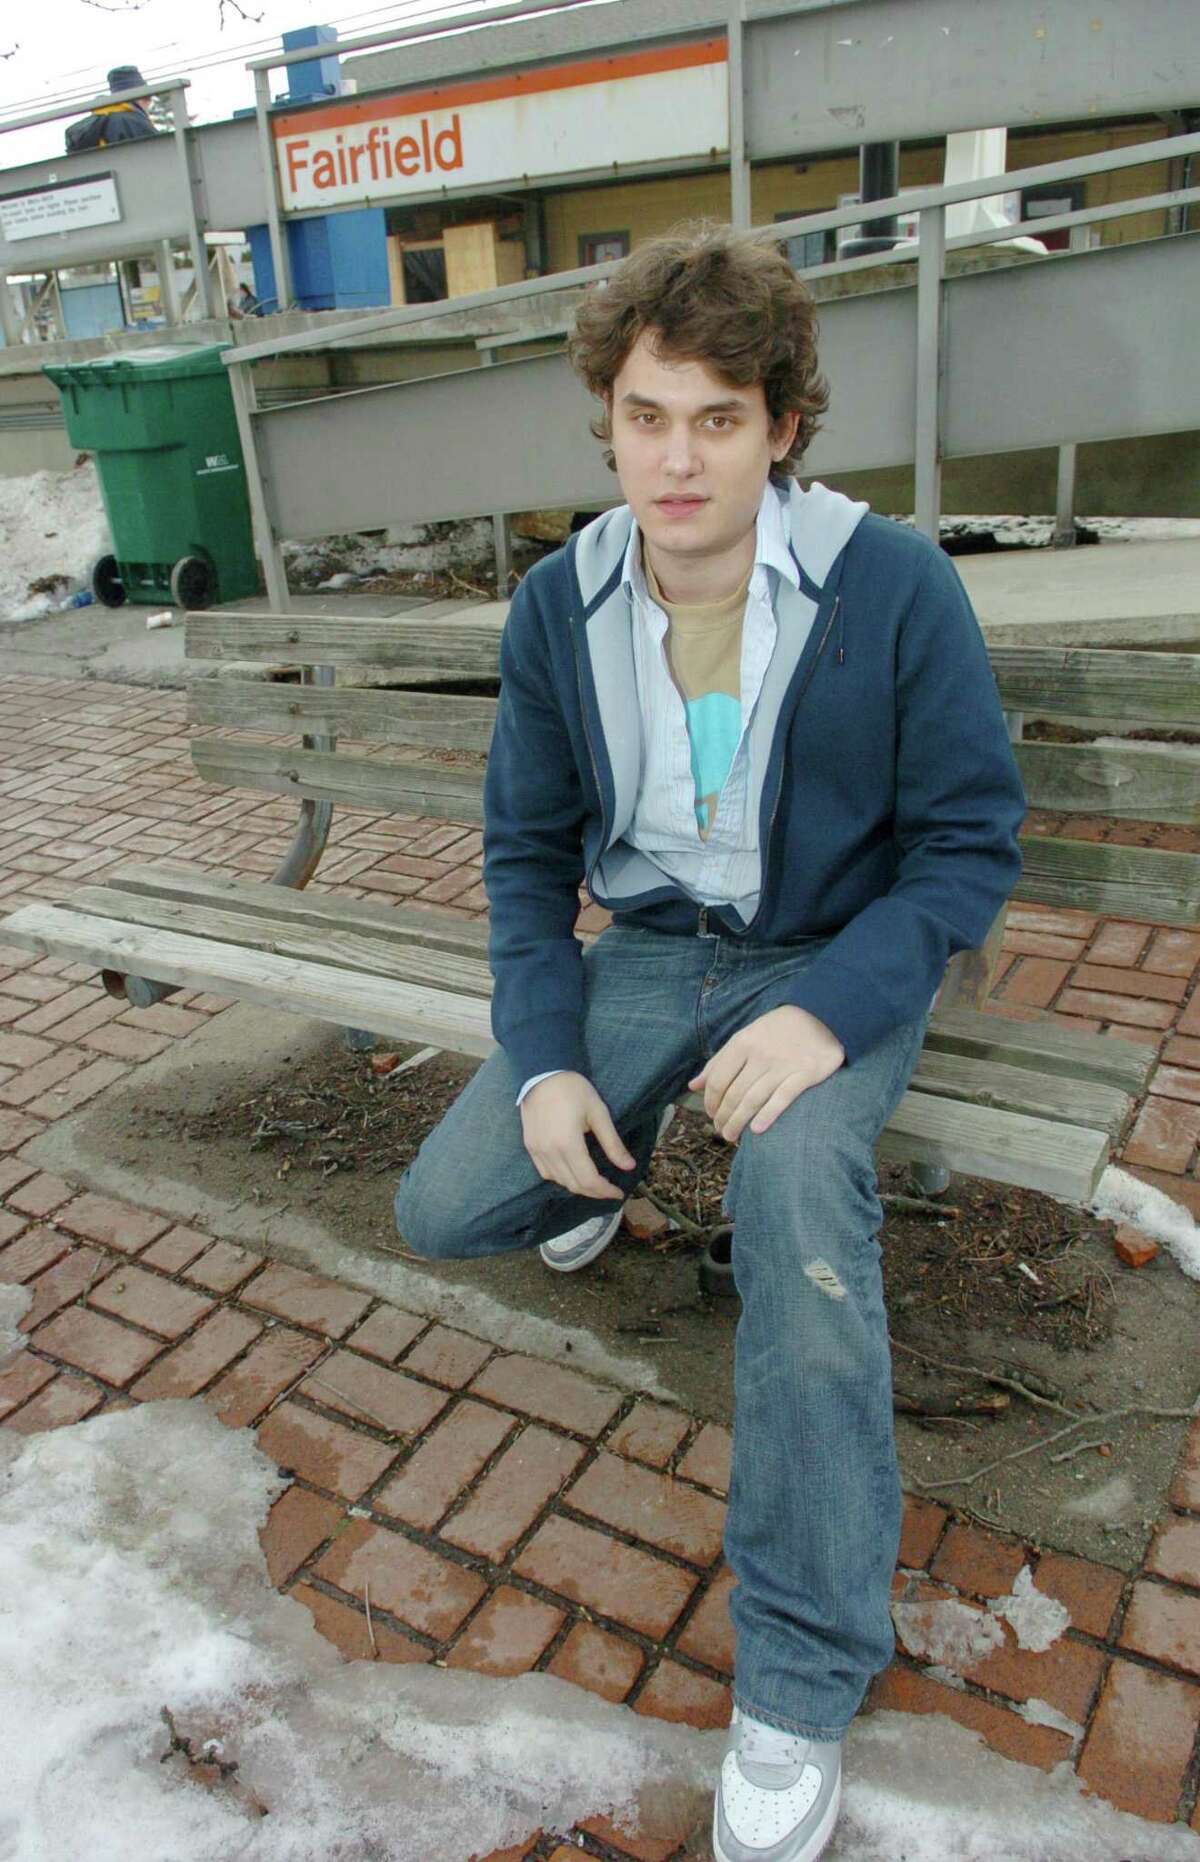 John Mayer at the Fairfield train station in 2005. Mayer, who was born in Bridgeport and grew up in Fairfield, gave his father a 90th birthday gift of a scholarship through Fairfield County’s Community Foundation.